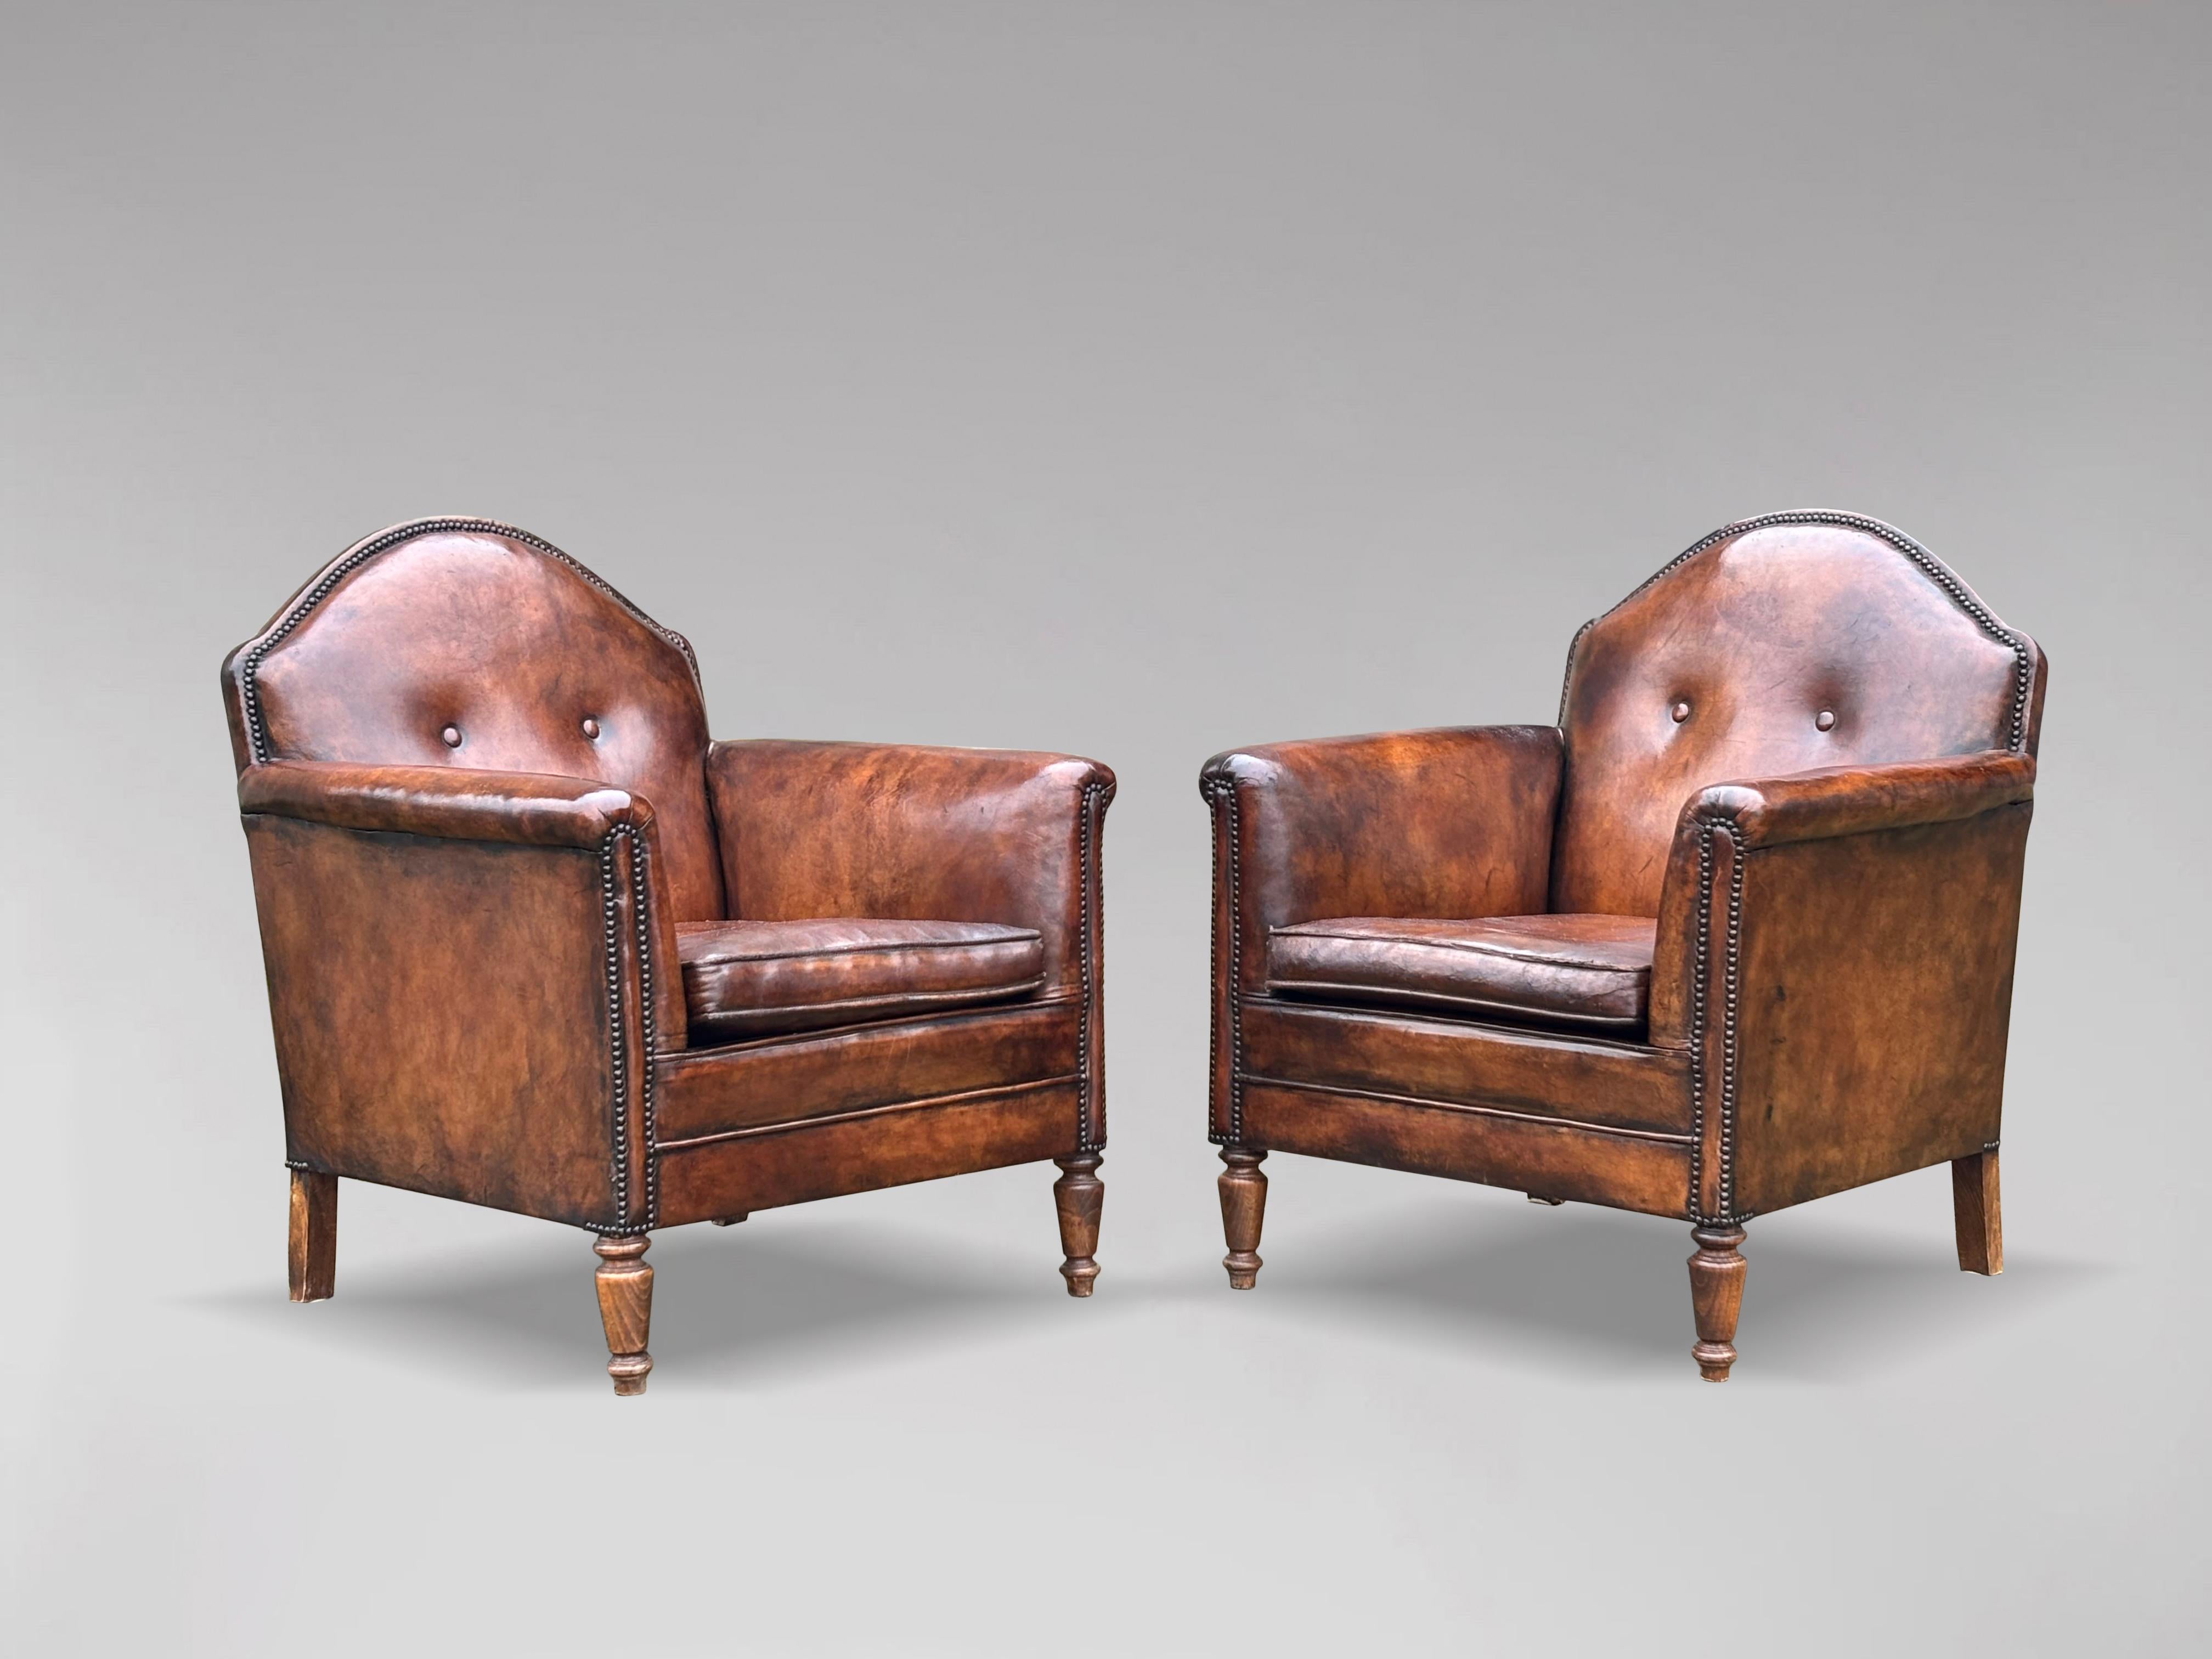 A fine pair of stunning quality 19th century French brown leather library armchairs, standing on turned oak legs. Very comfortable with great colour to the leather. Retaining the original leather and studs, shaped back, loose feathered cushion,